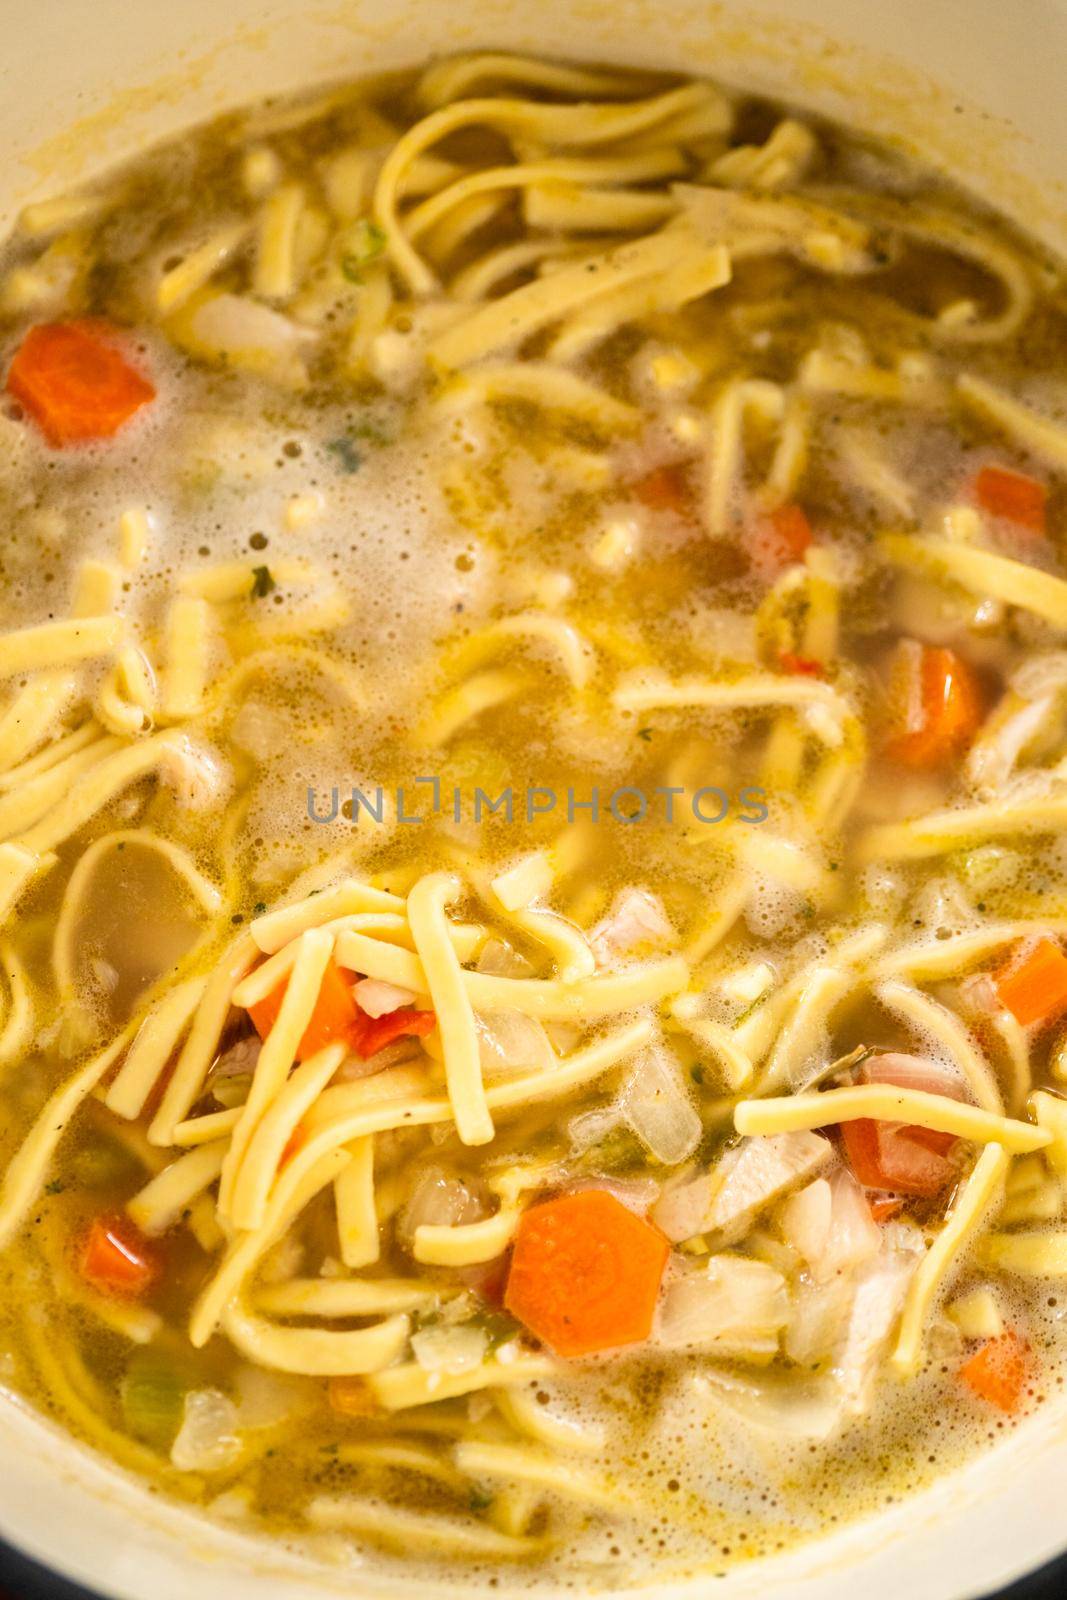 Chicken Noodle Soup by arinahabich